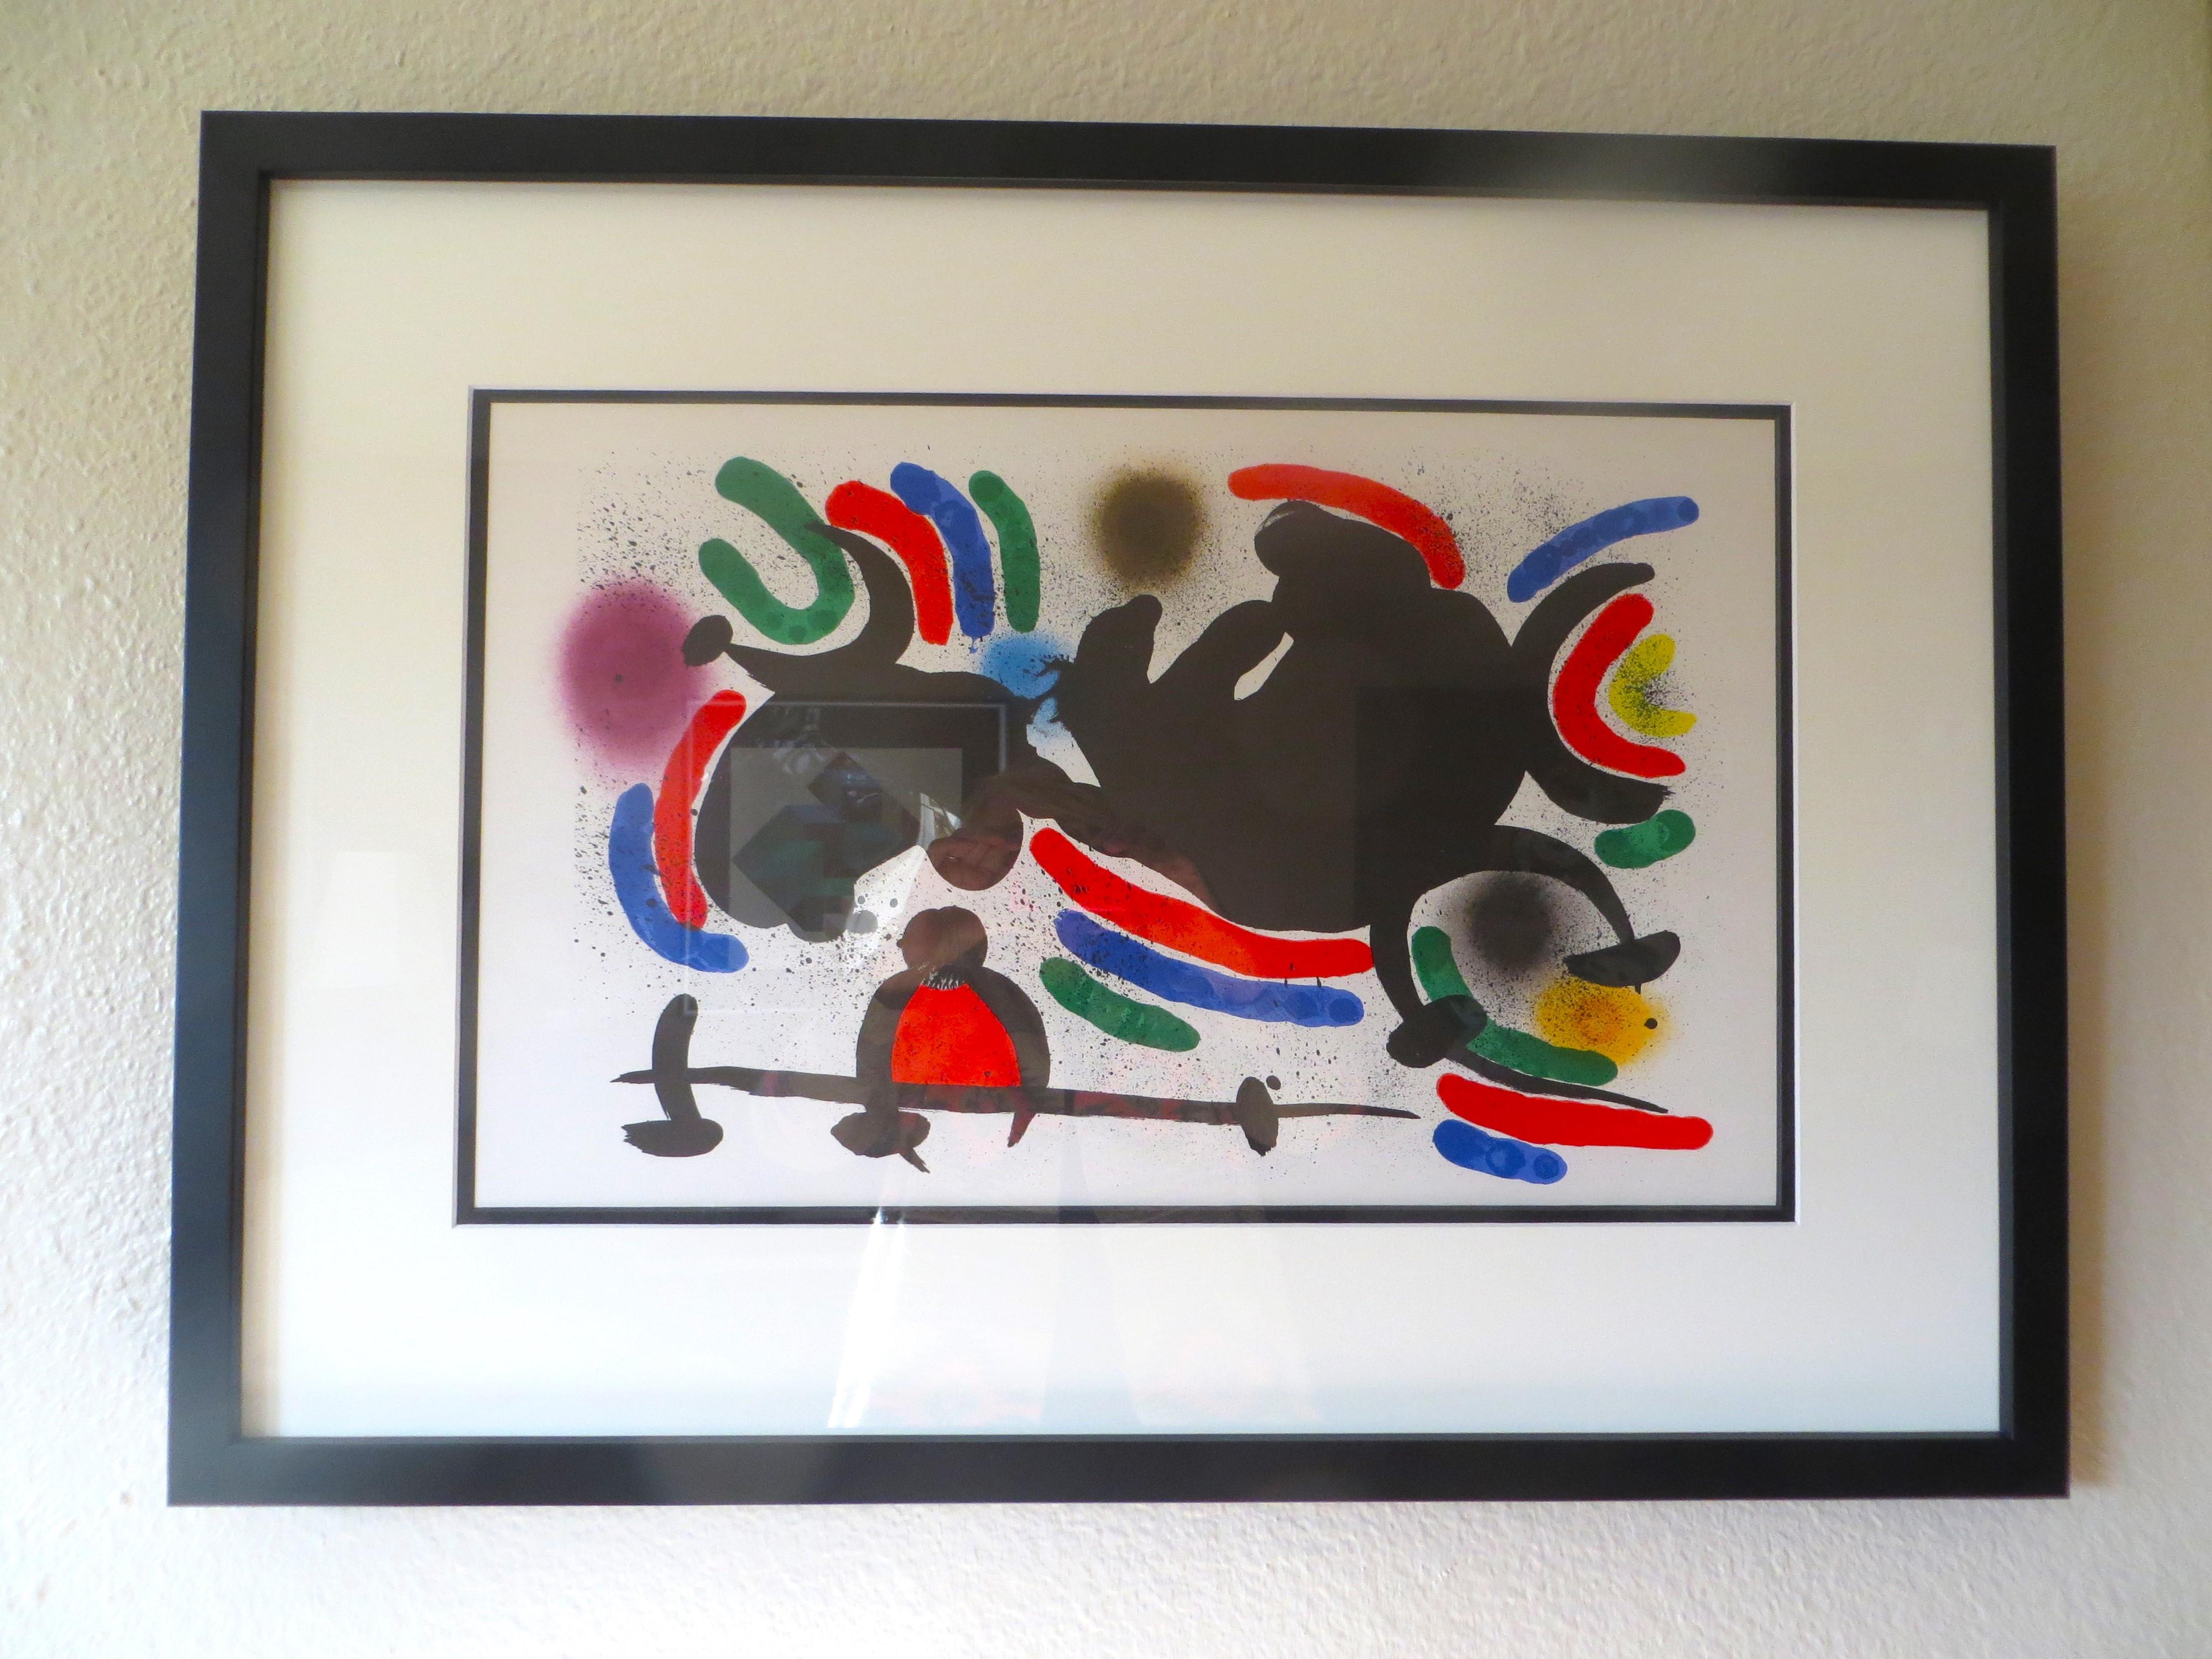 (after) Joan Miró Abstract Print – Abstrakte Lithographie I, Maegh-Autor, Derriere le Miroir, 1978